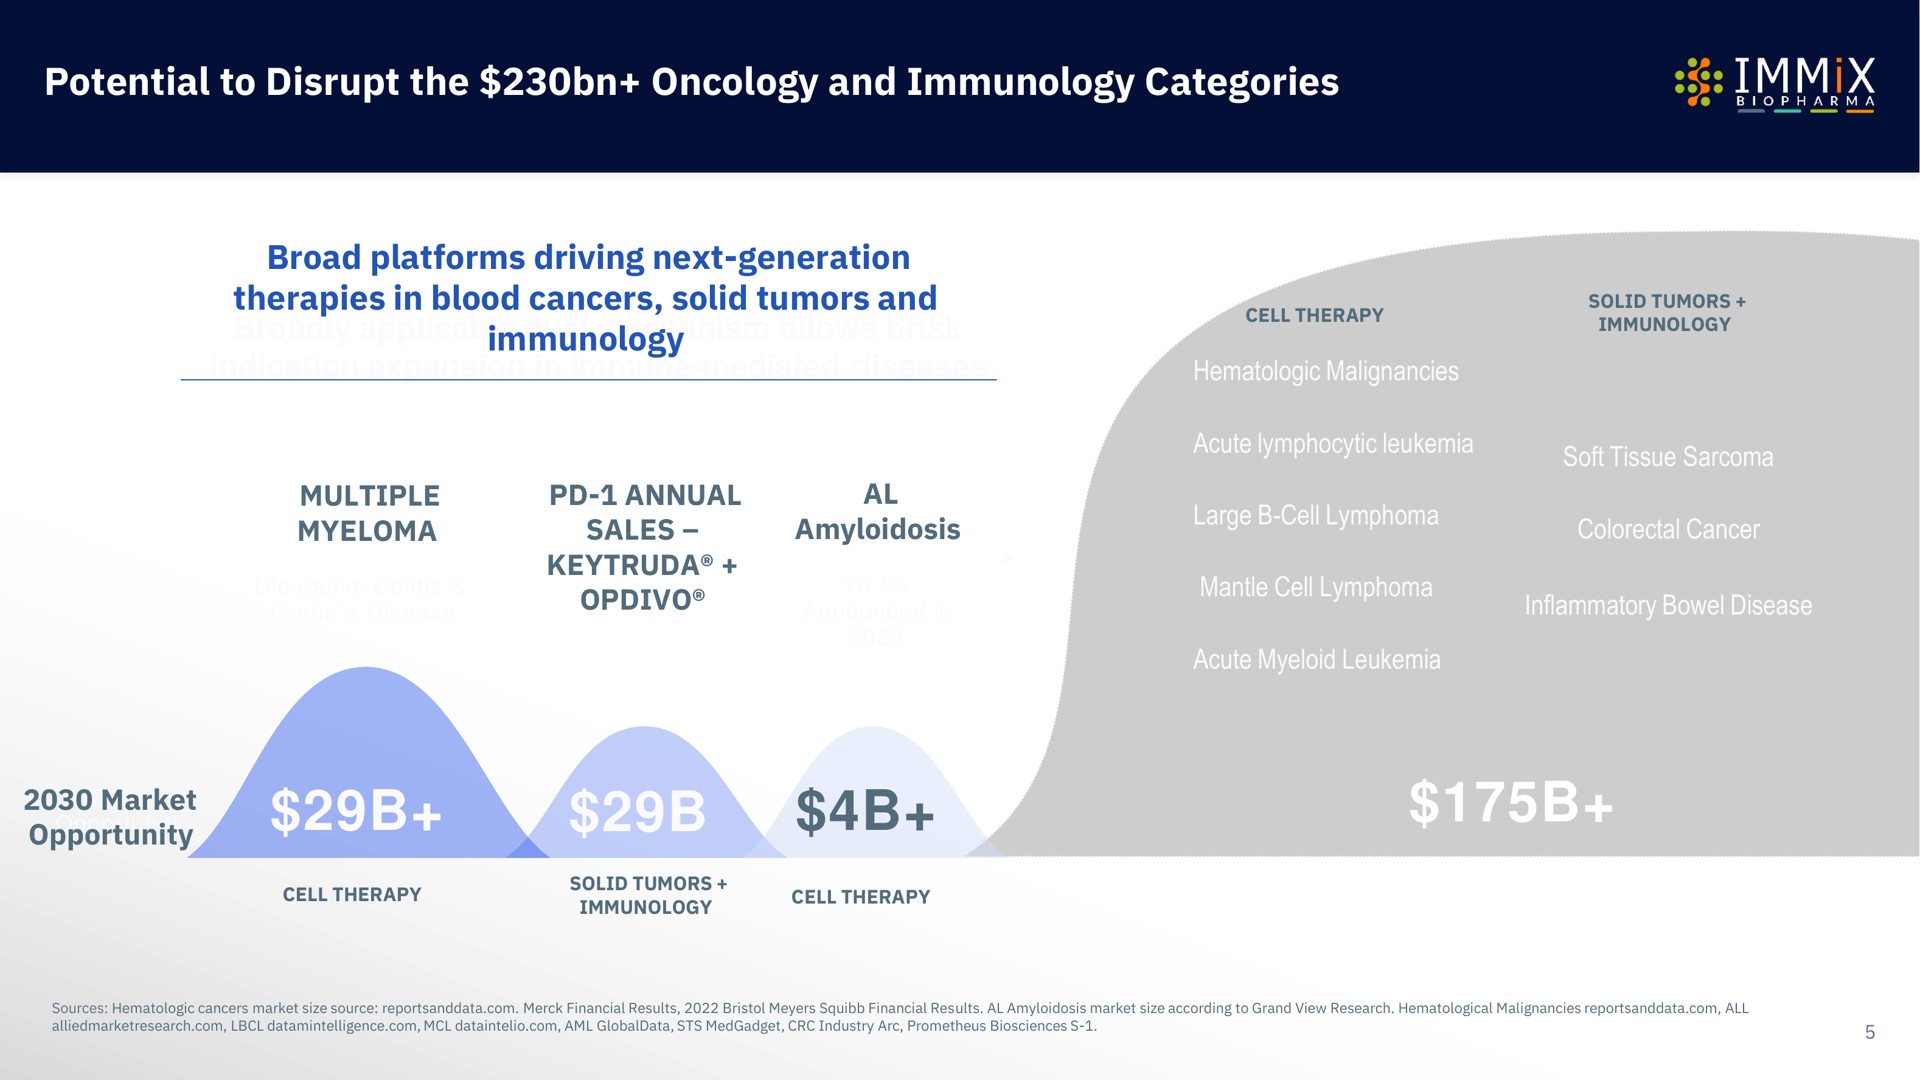 potential to disrupt the oncology and immunology categories | Immix Biopharma